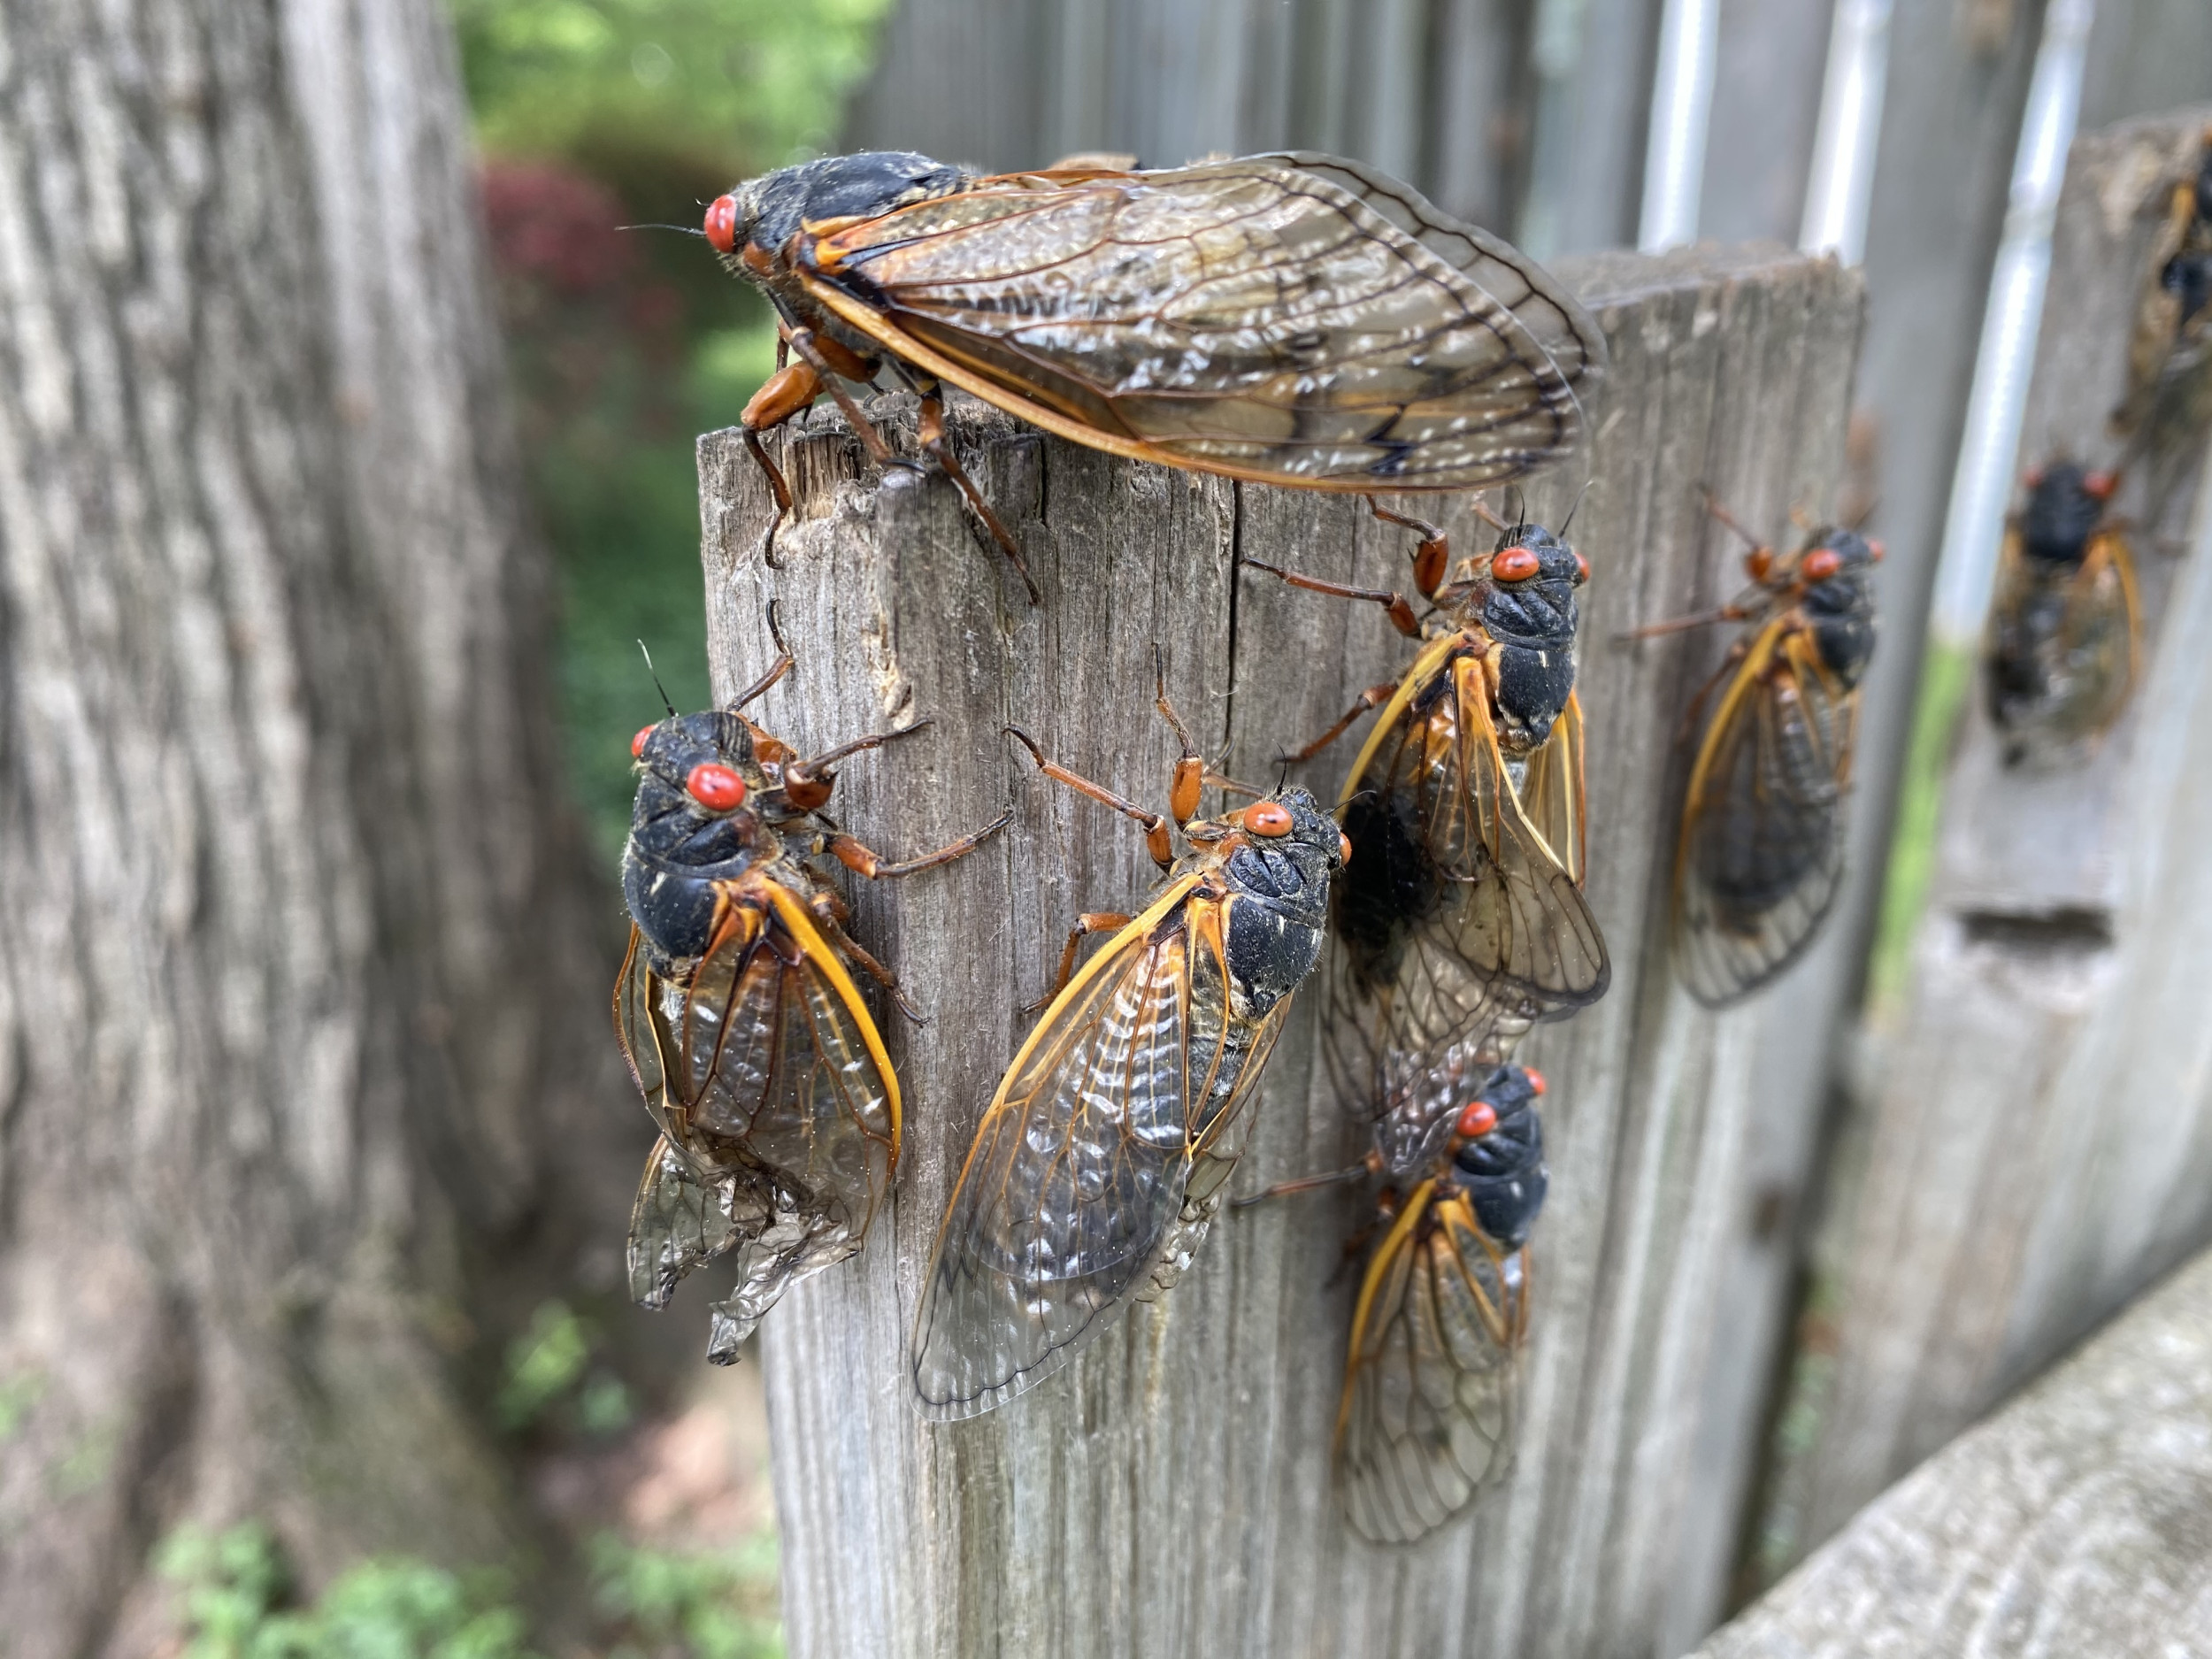 Cicada double invasion to “utterly cover” parts of the US, ecologist says